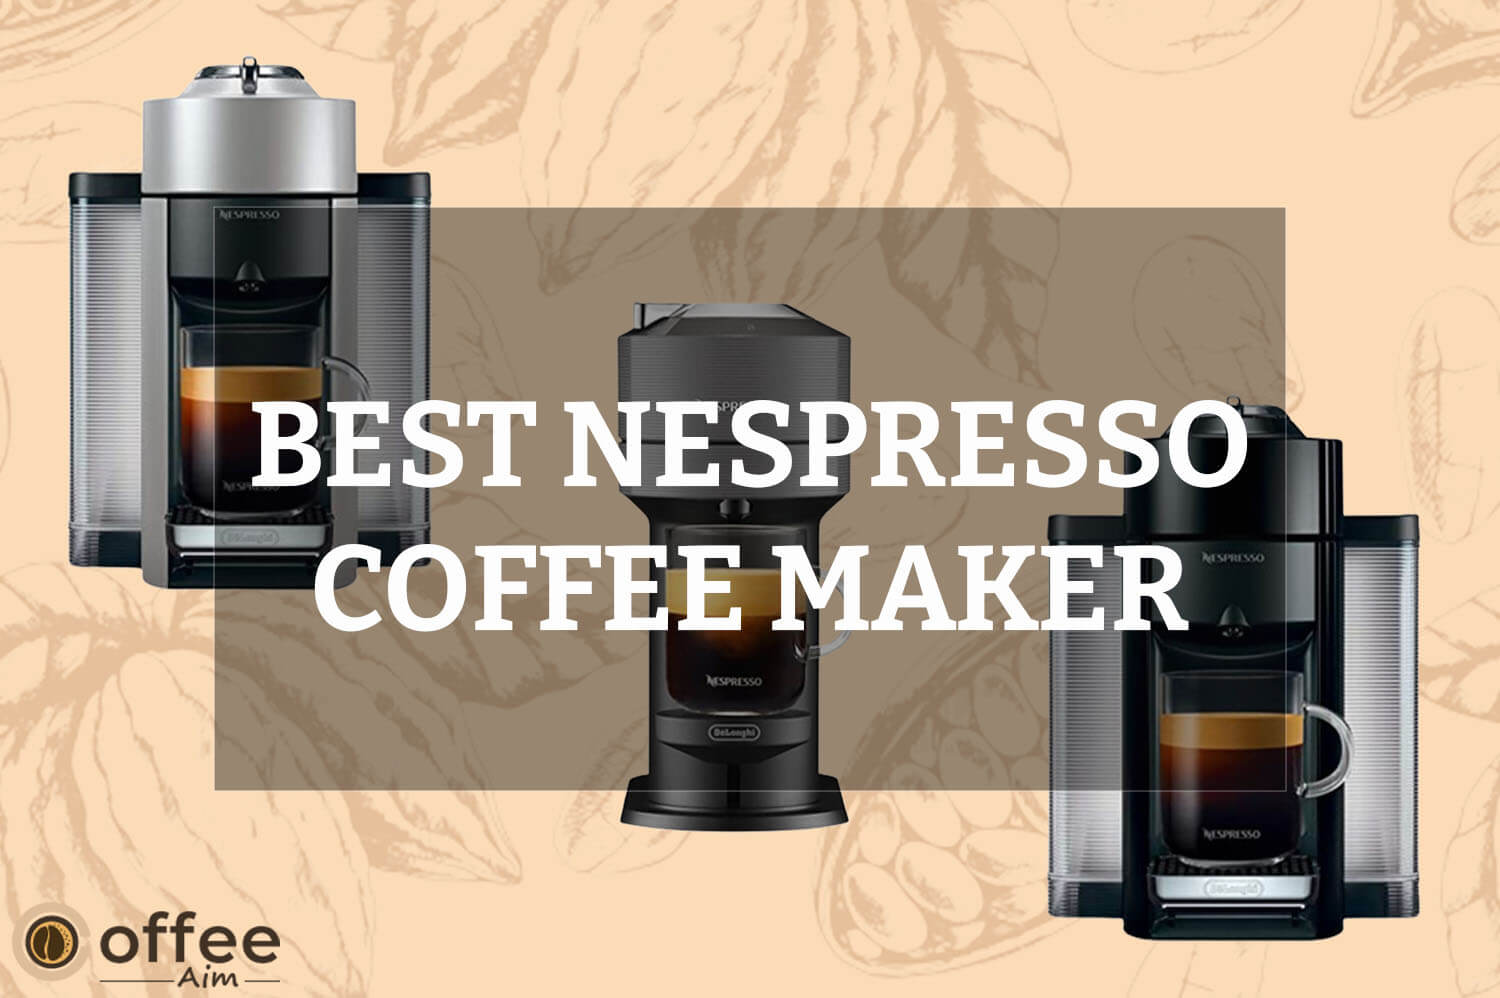 Featured image for the article "Best Nespresso Coffee Maker"